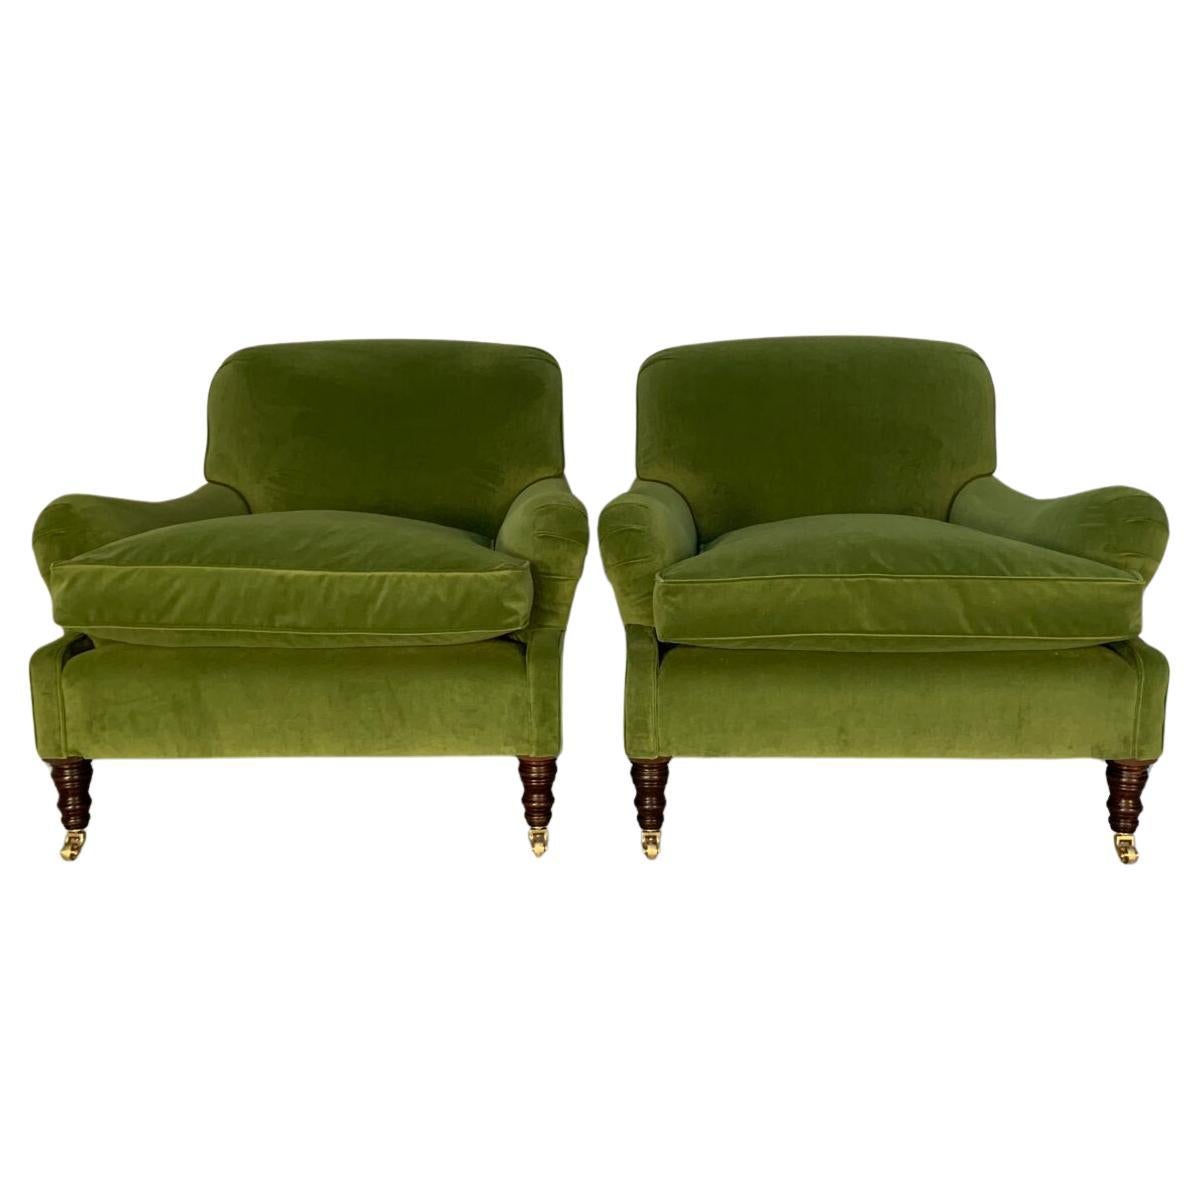 George Smith "Signature" Armchairs - In Mid-Green Velvet 